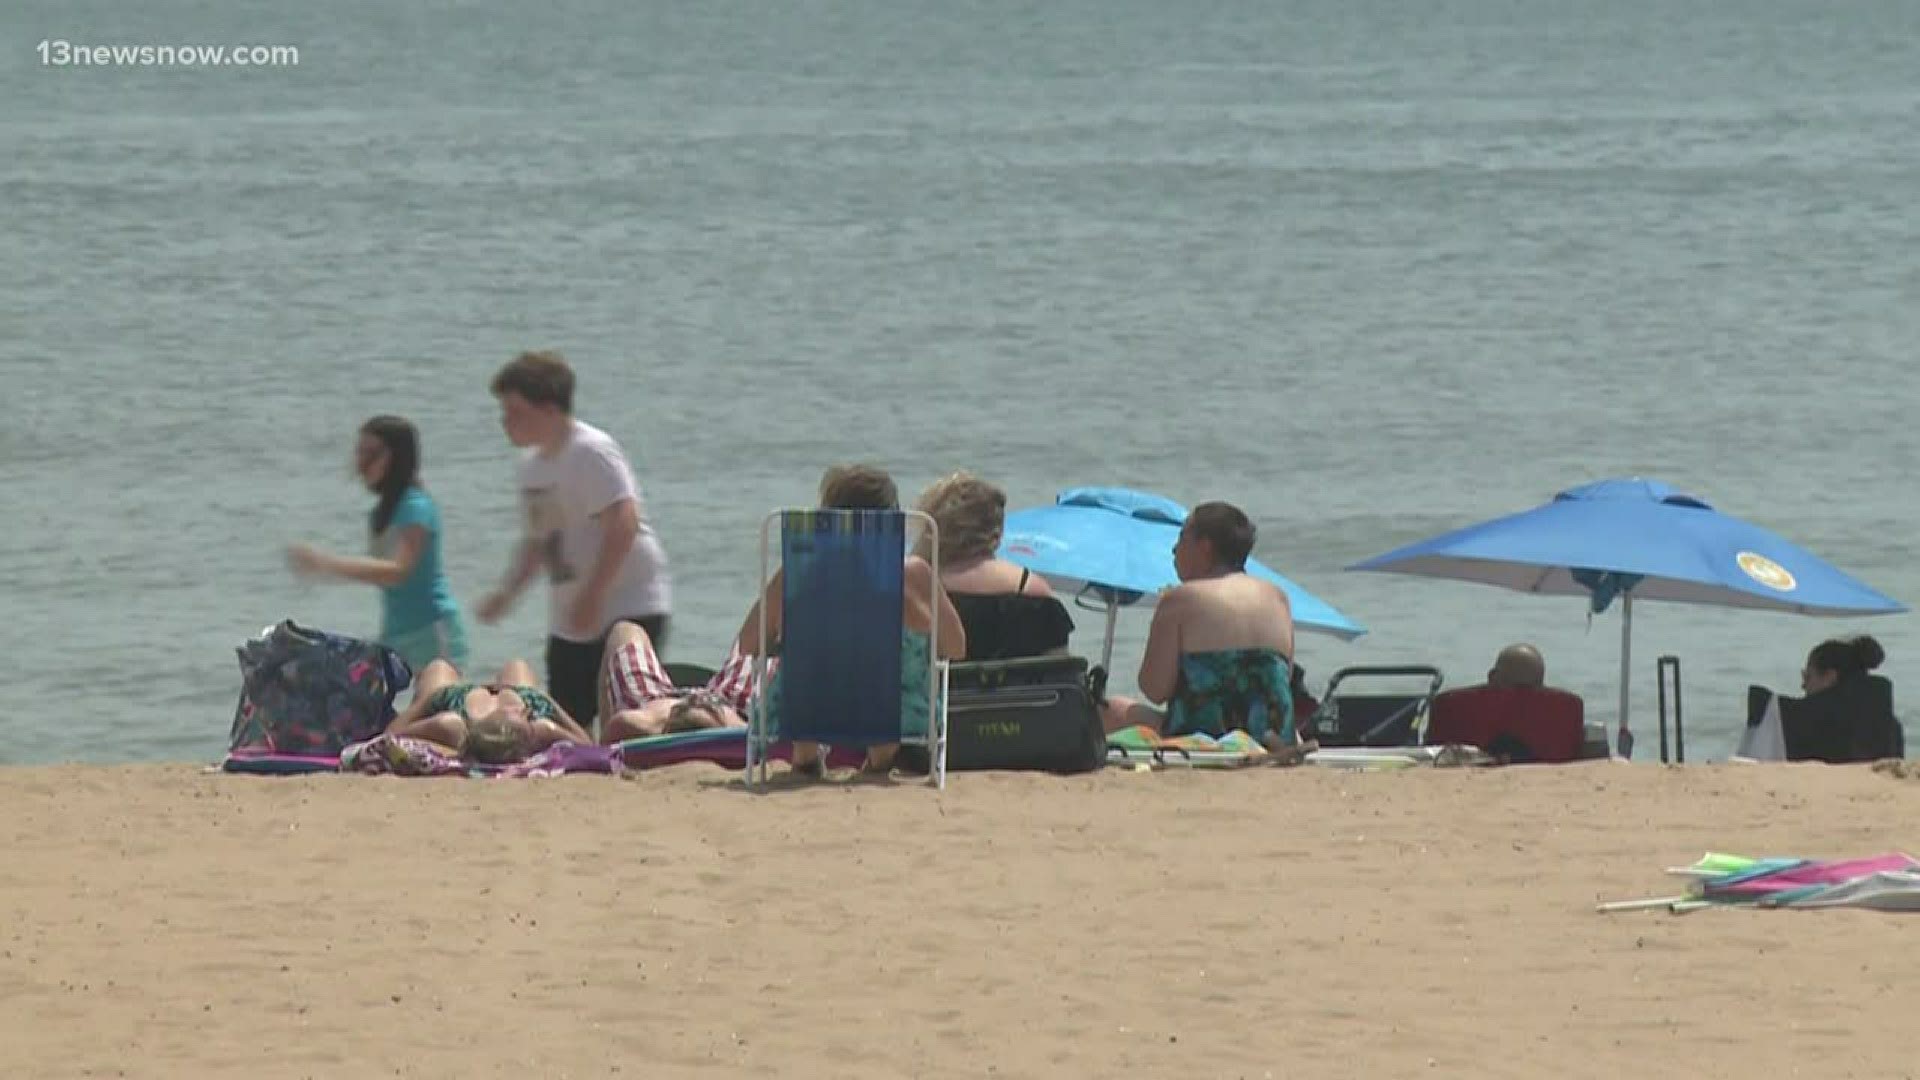 Beachgoers continued to social distance amid the coronavirus pandemic and new COVID-19 regulations are still in place at the beach.